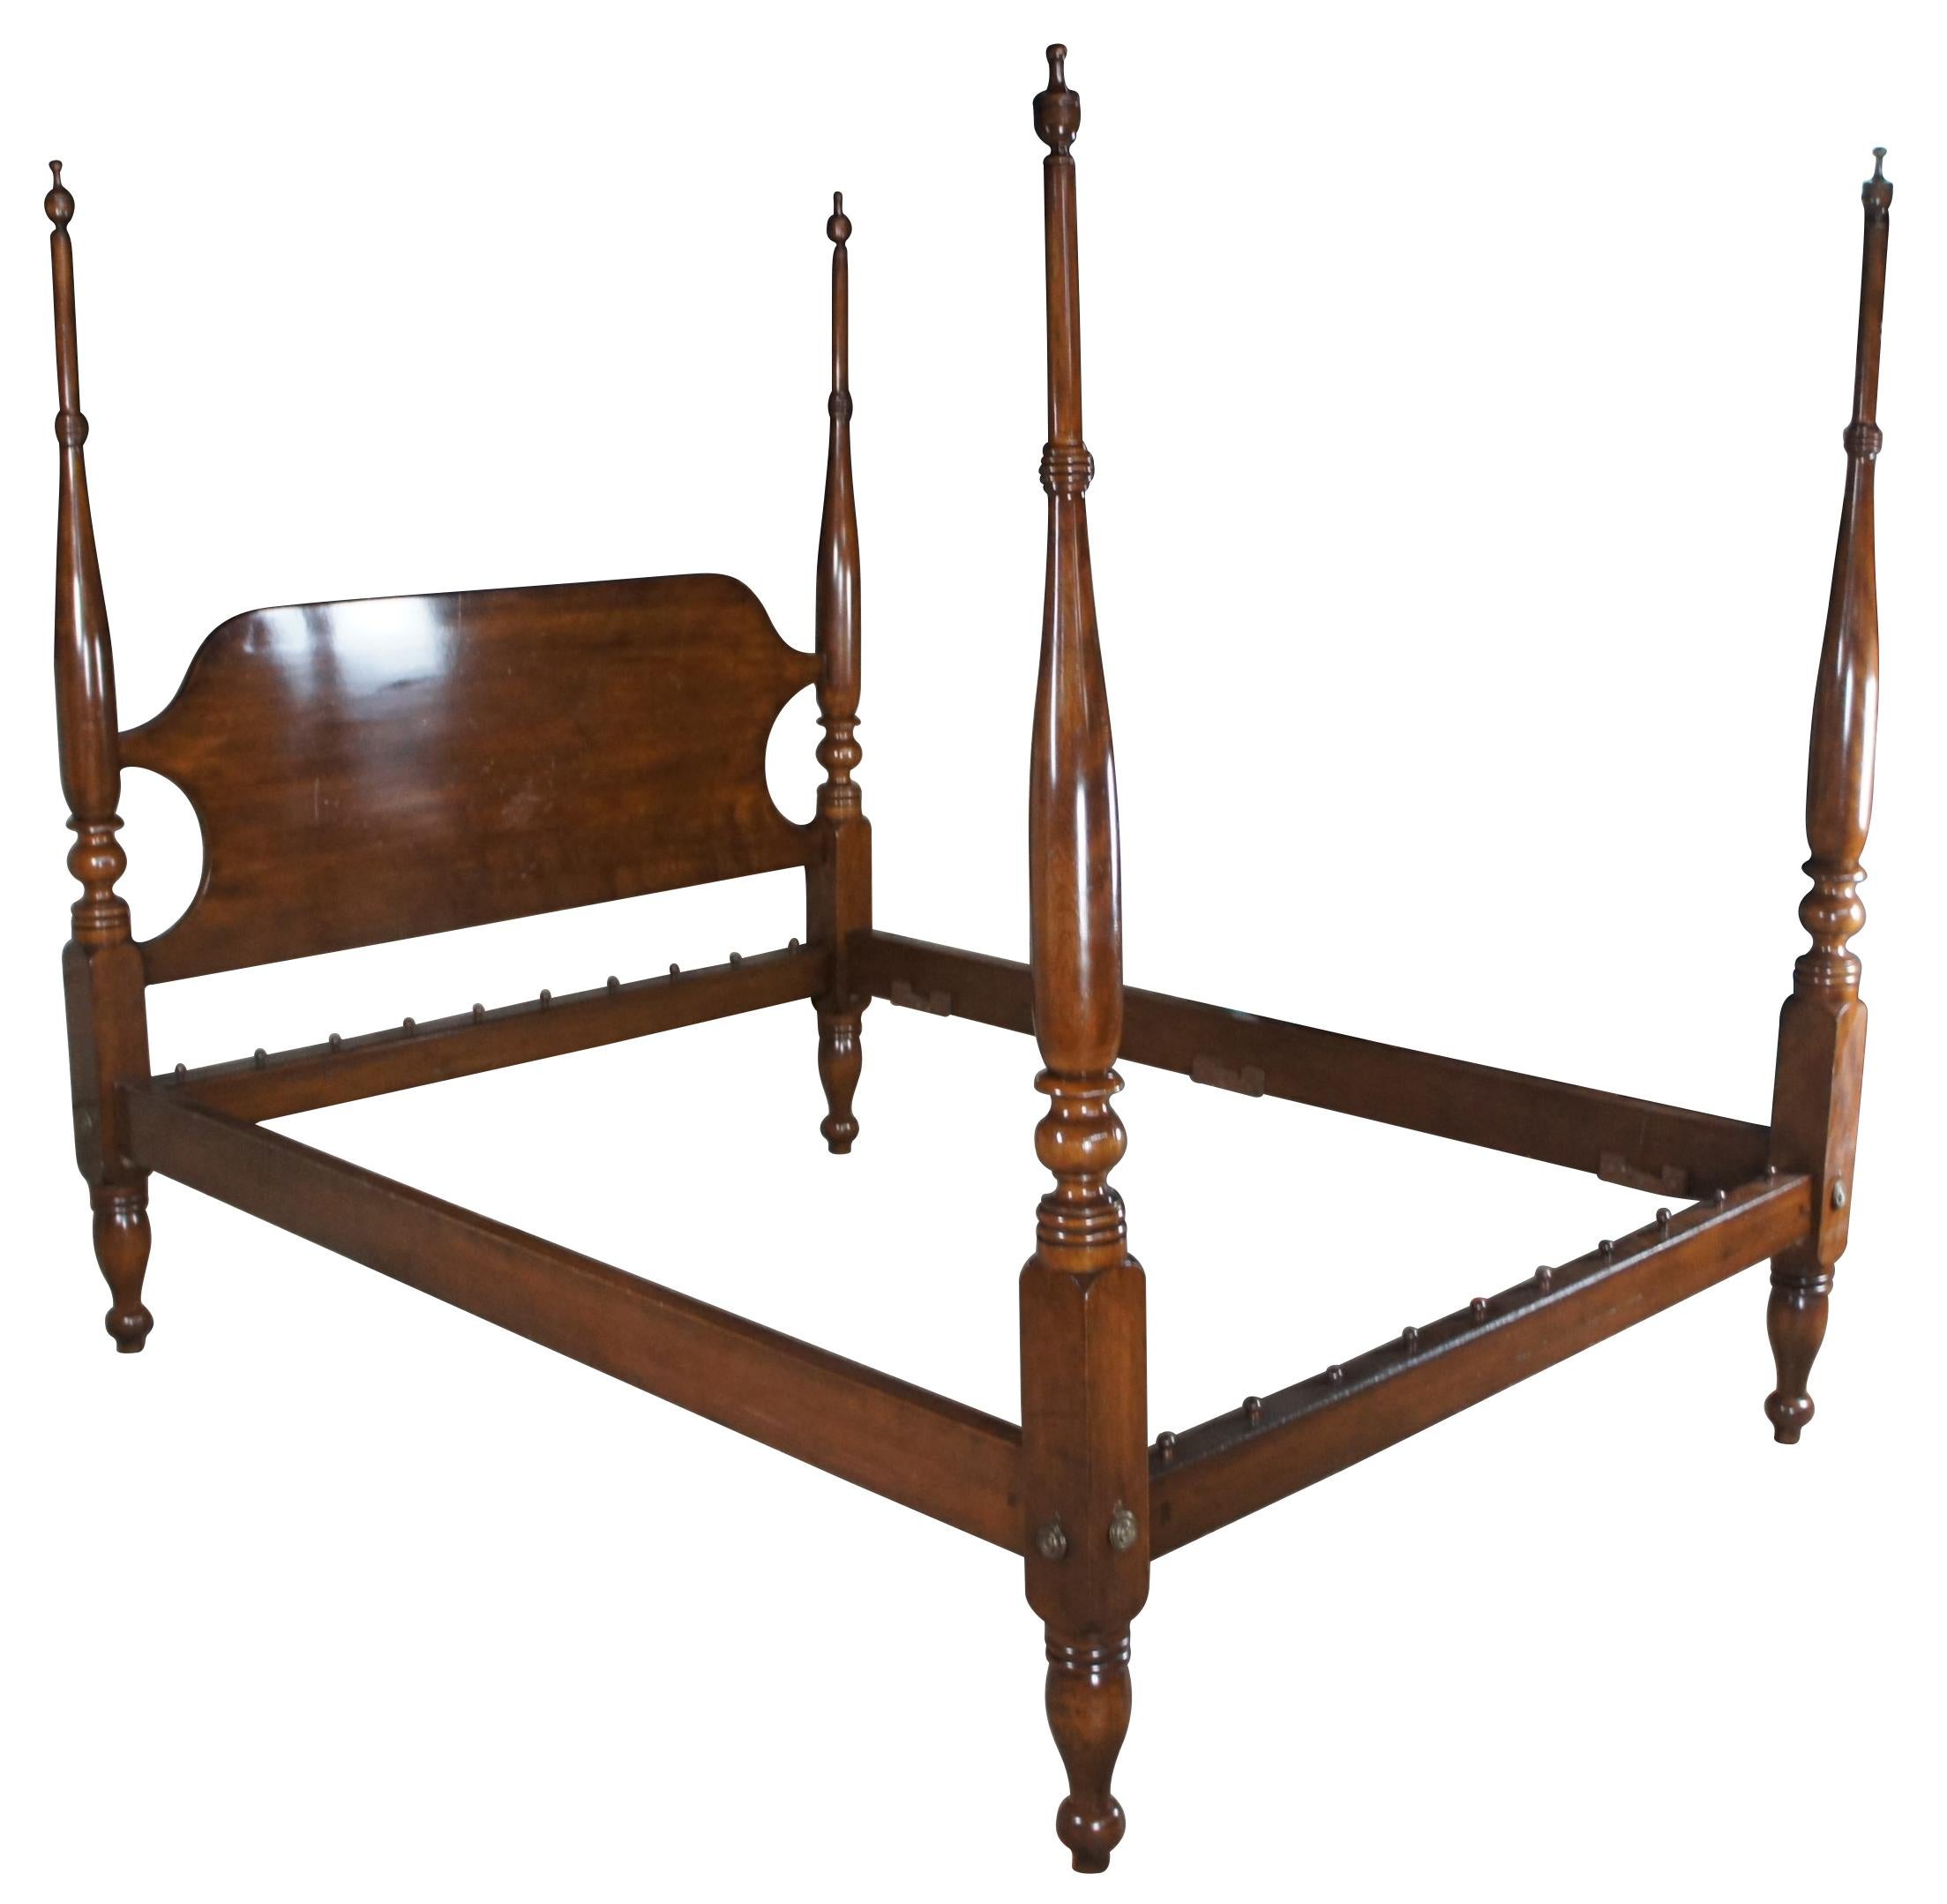 A beautiful 4 poster solid Mahogany, circa 1950s. Features a camelback headboard and long turned ribbed posts with leading to trophy finials. The bed has colonial brass plates along the corners and is supported by turned toupie or turnip